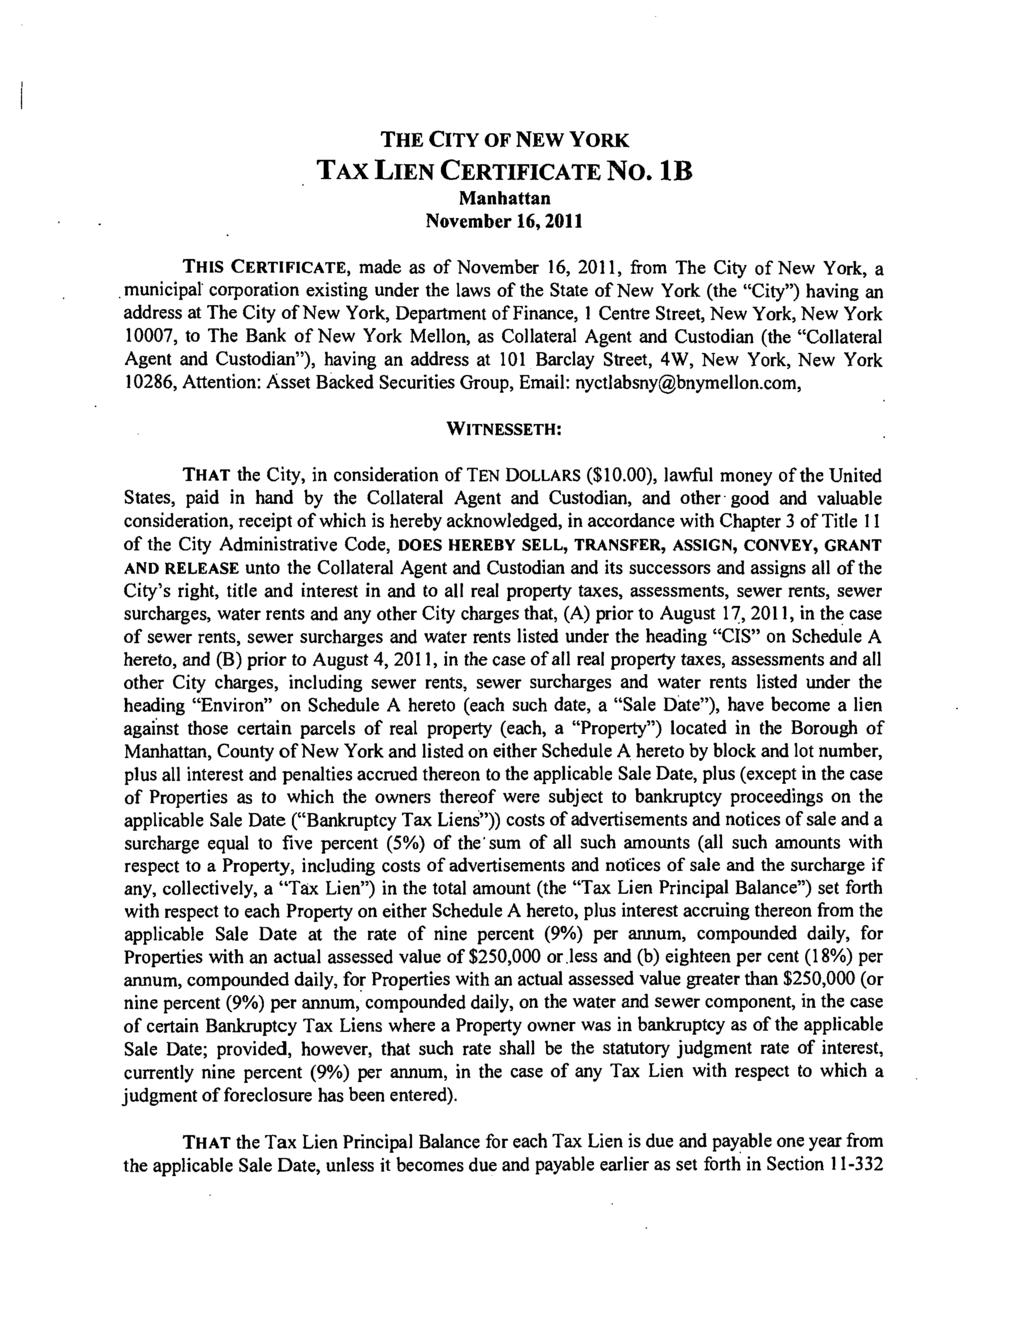 THE CITY OF NEW YORK TAX LIEN CERTIFICATE NO.